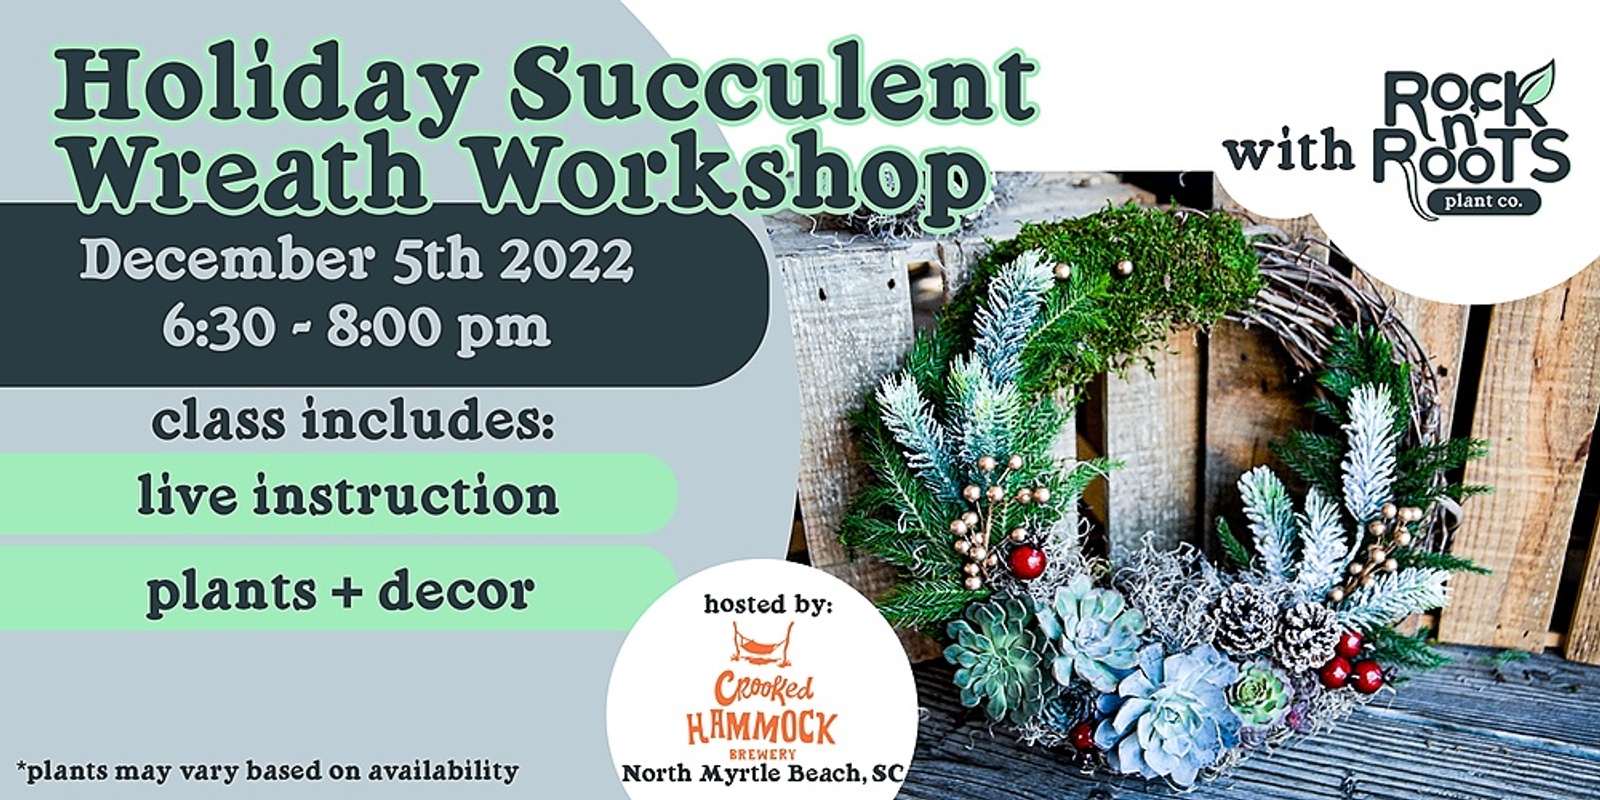 Banner image for Holiday Succulent Wreath Workshop at Crooked Hammock Brewery (North Myrtle Beach, SC)